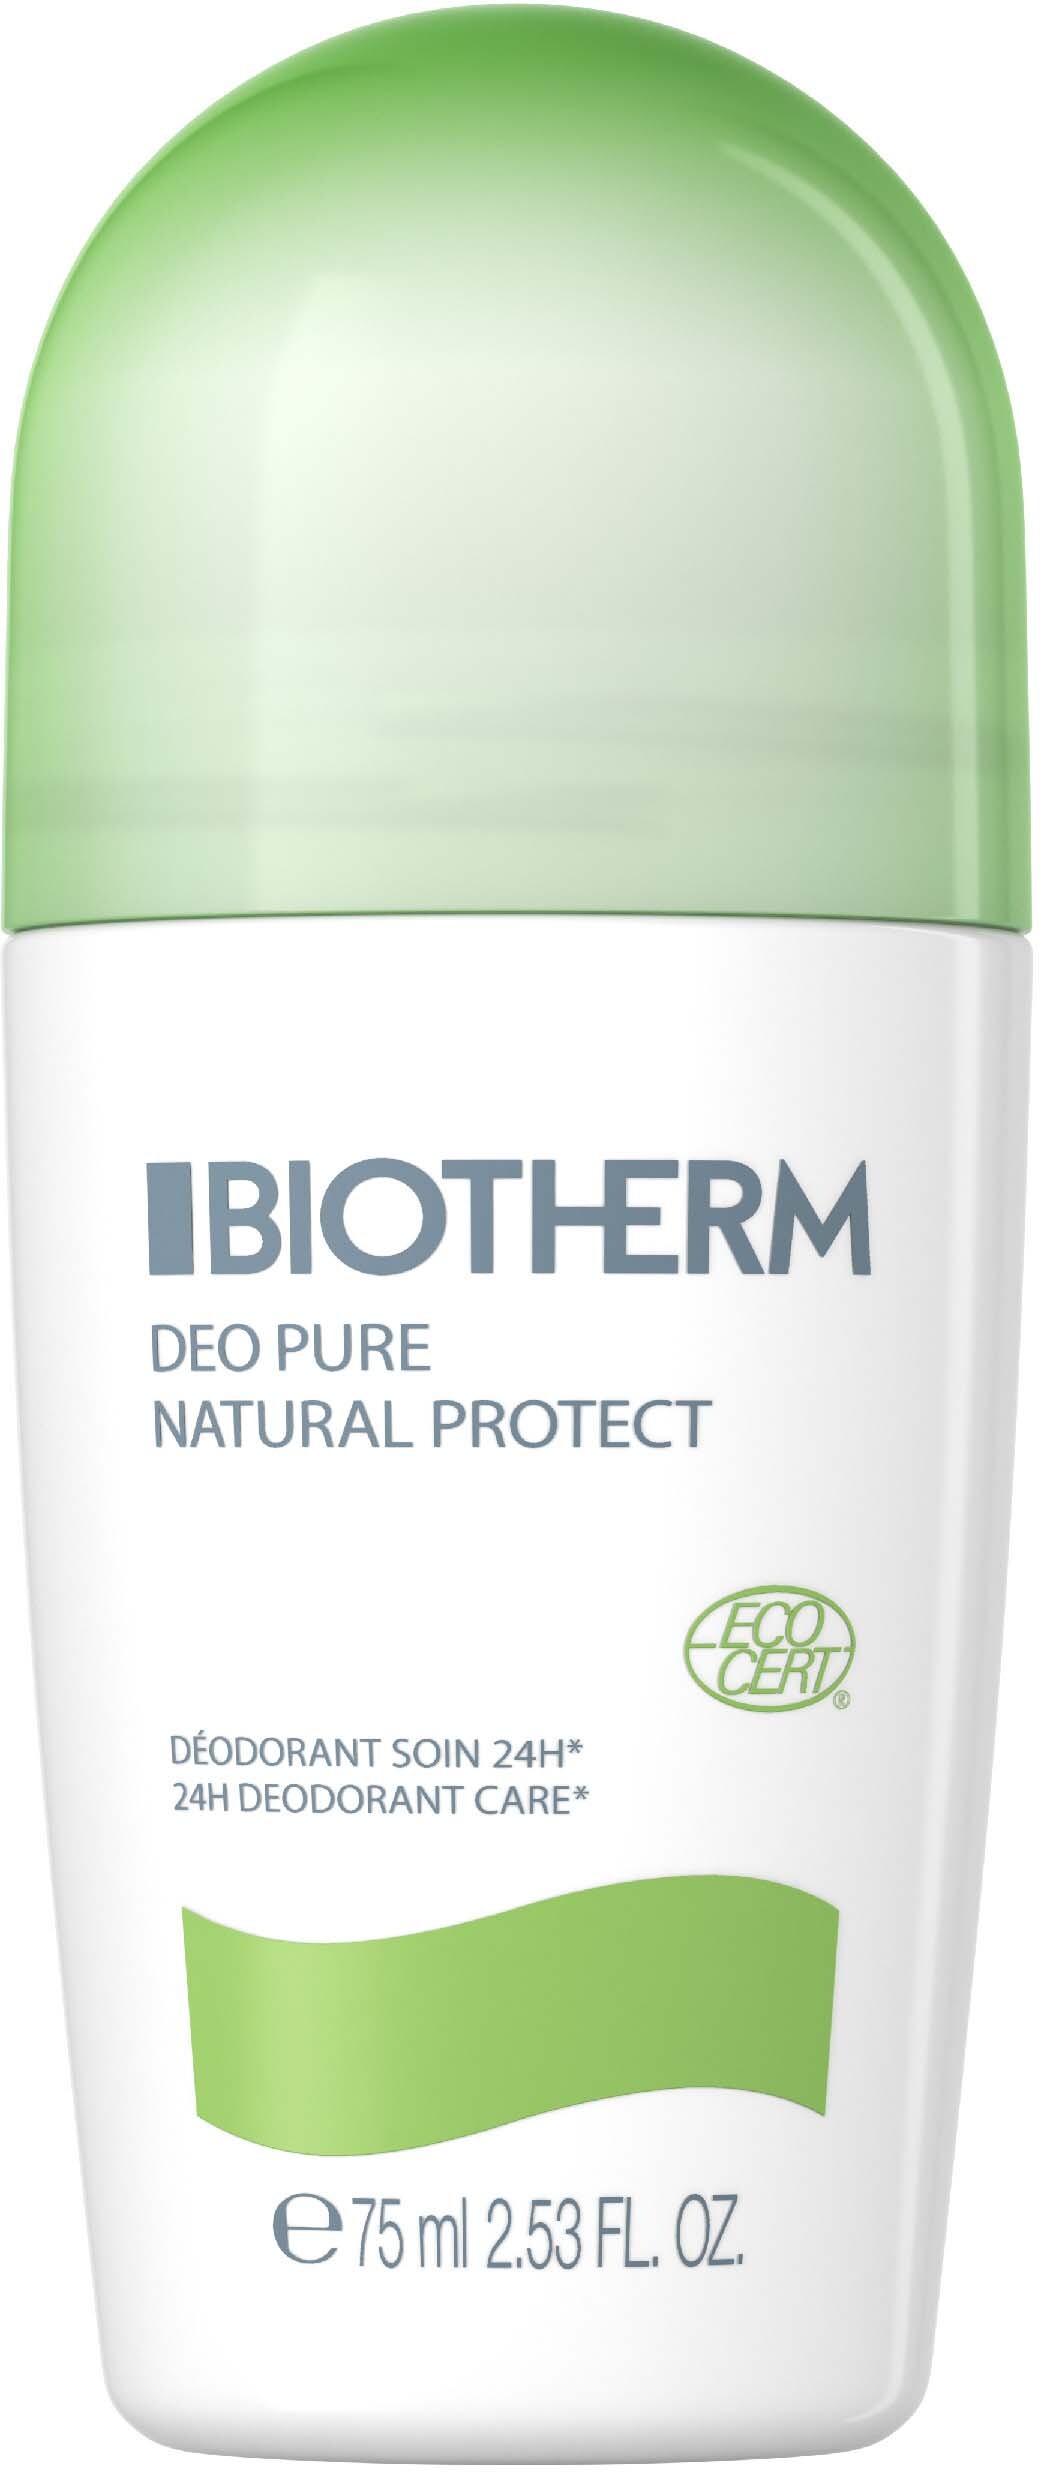 Biotherm Deo Pure Natural Protect 24h Deodorant Care 75 ml